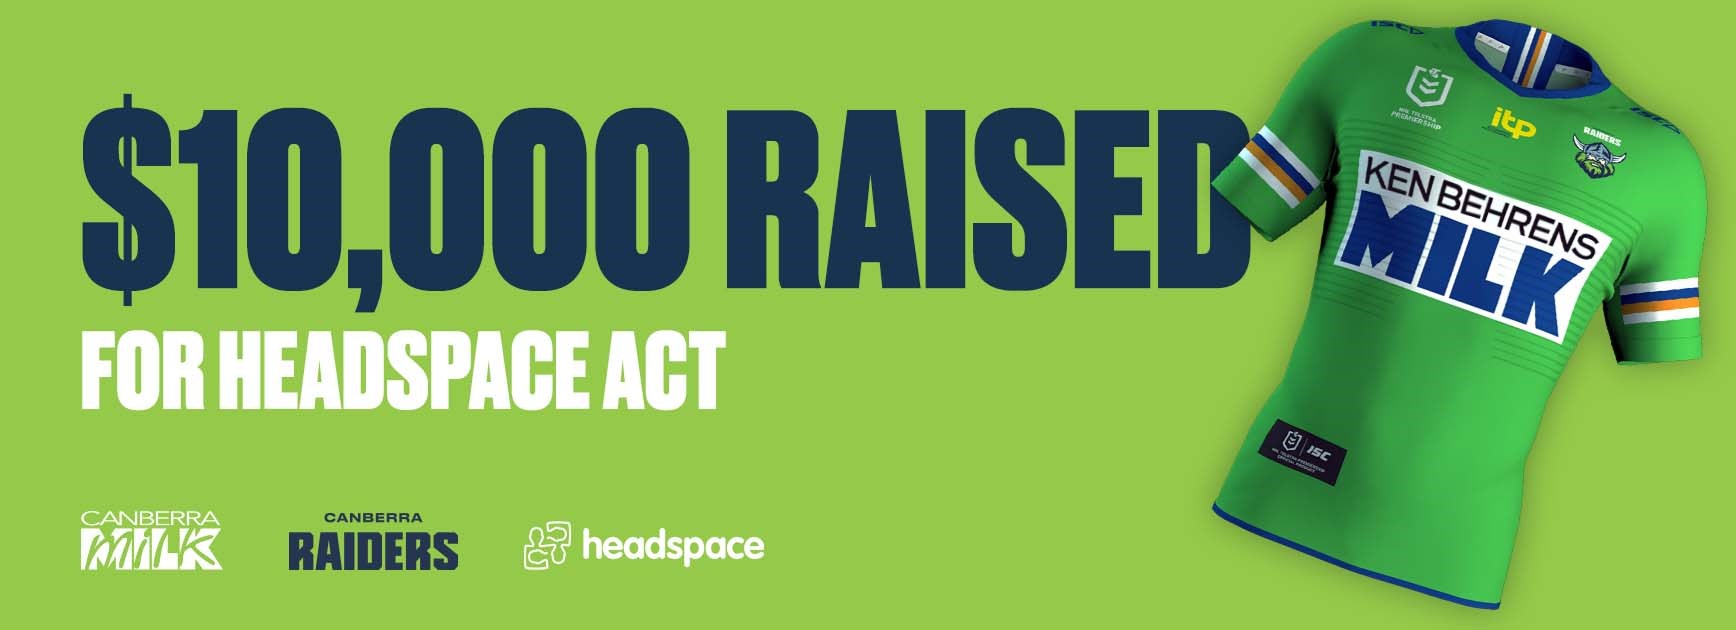 Raiders and Canberra Milk raise $10,000 for headspace